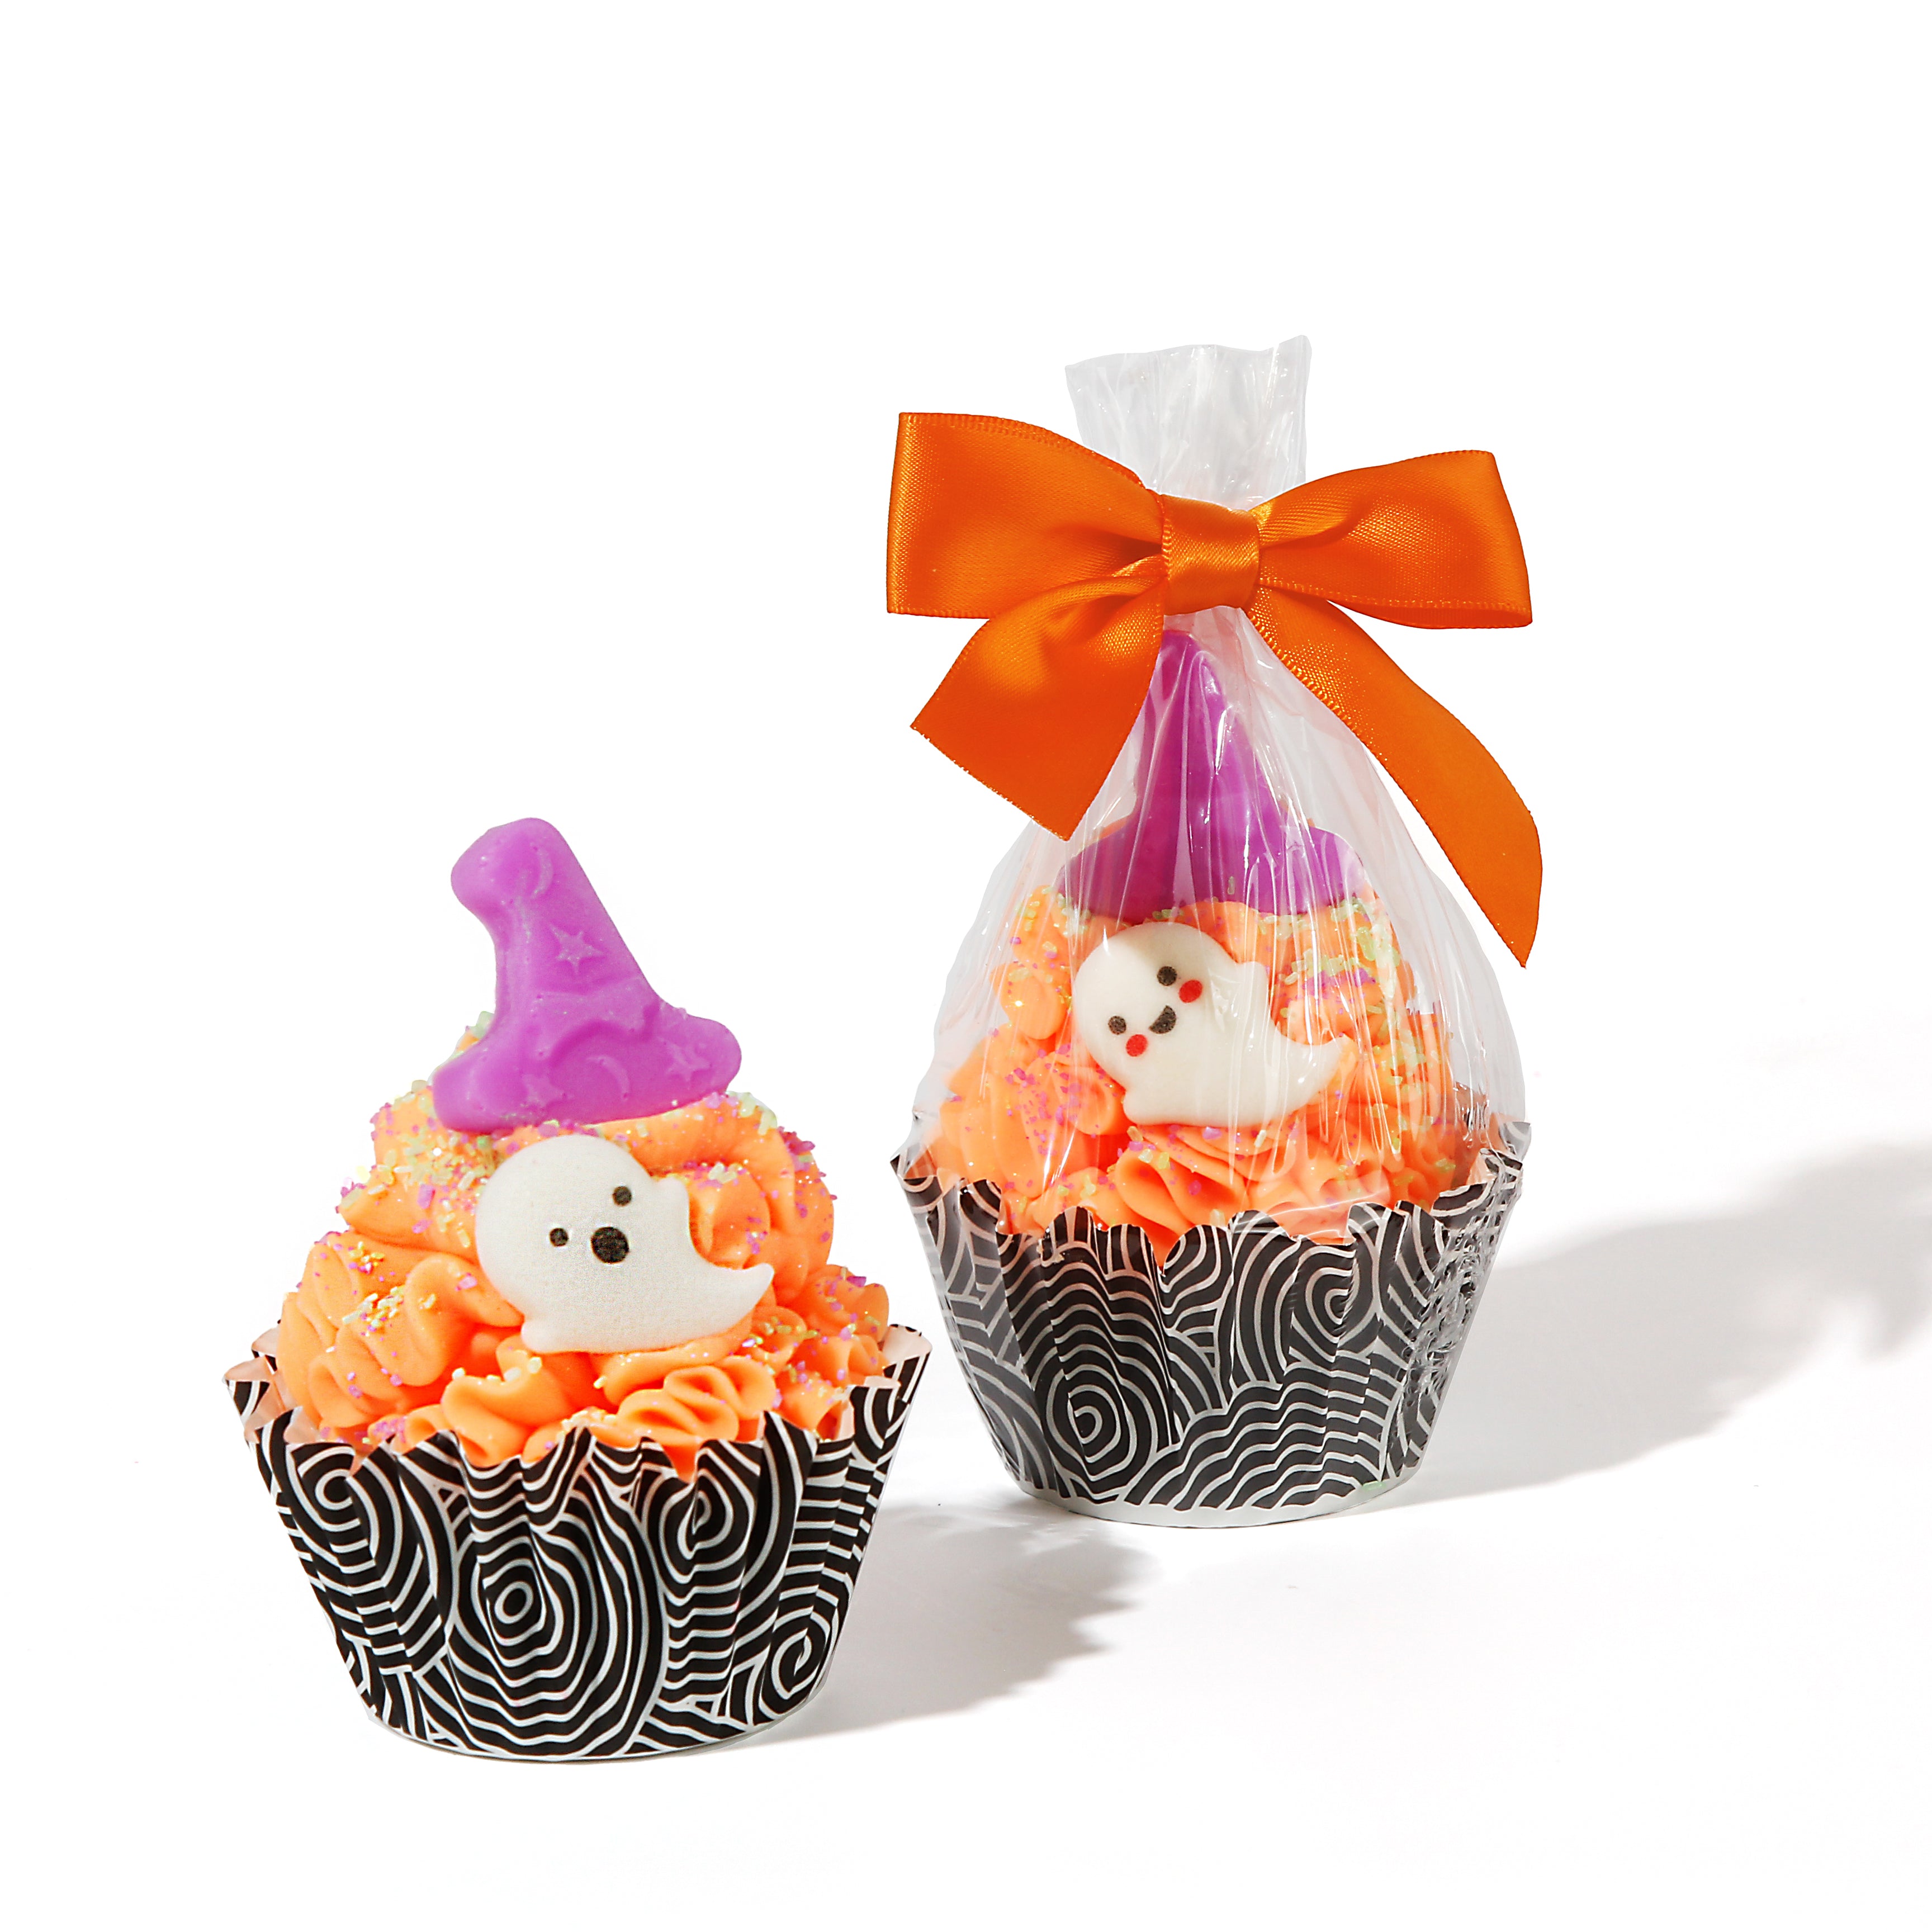 Realistic sized soap cupcake with a and black and white spiral patterned line. Bright orange soap frosting with a small ghost decoration and purple witch hat topper. Next to it is the same cupcake but packaged in a clear bag and tied with an orange bow.